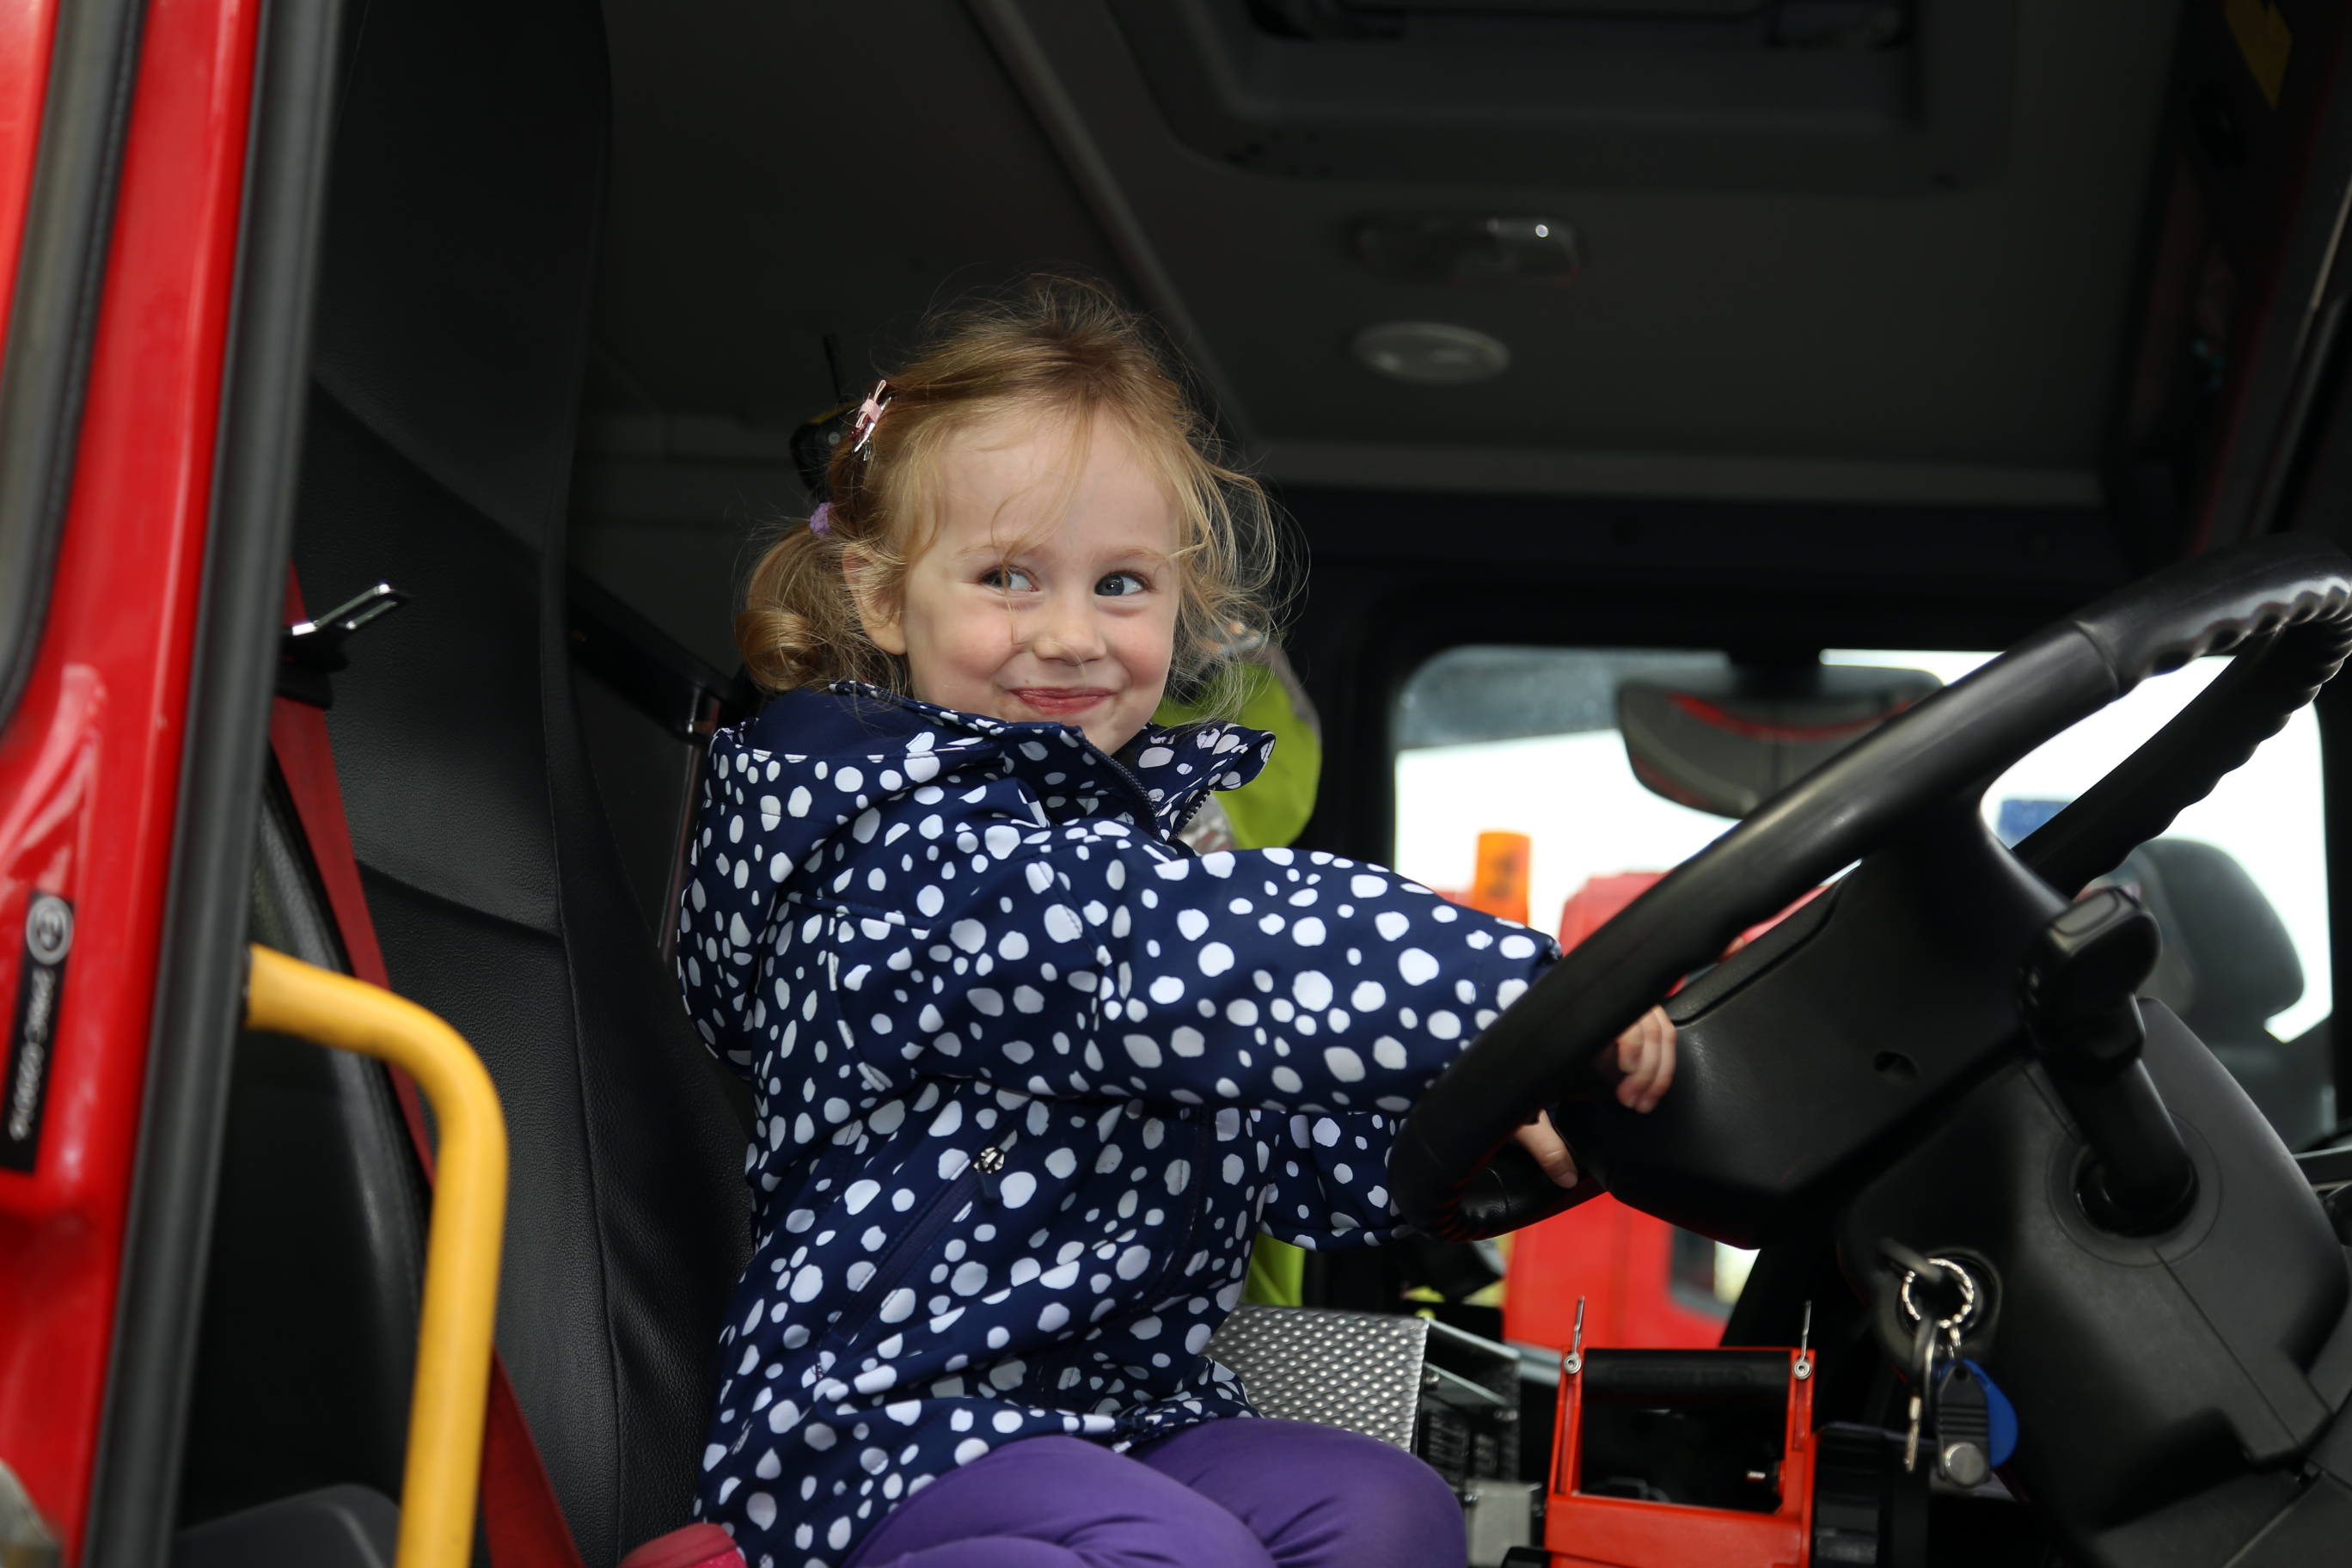 Enid Round, age 3 from Shrewsbury behind the wheel of a fire engine.